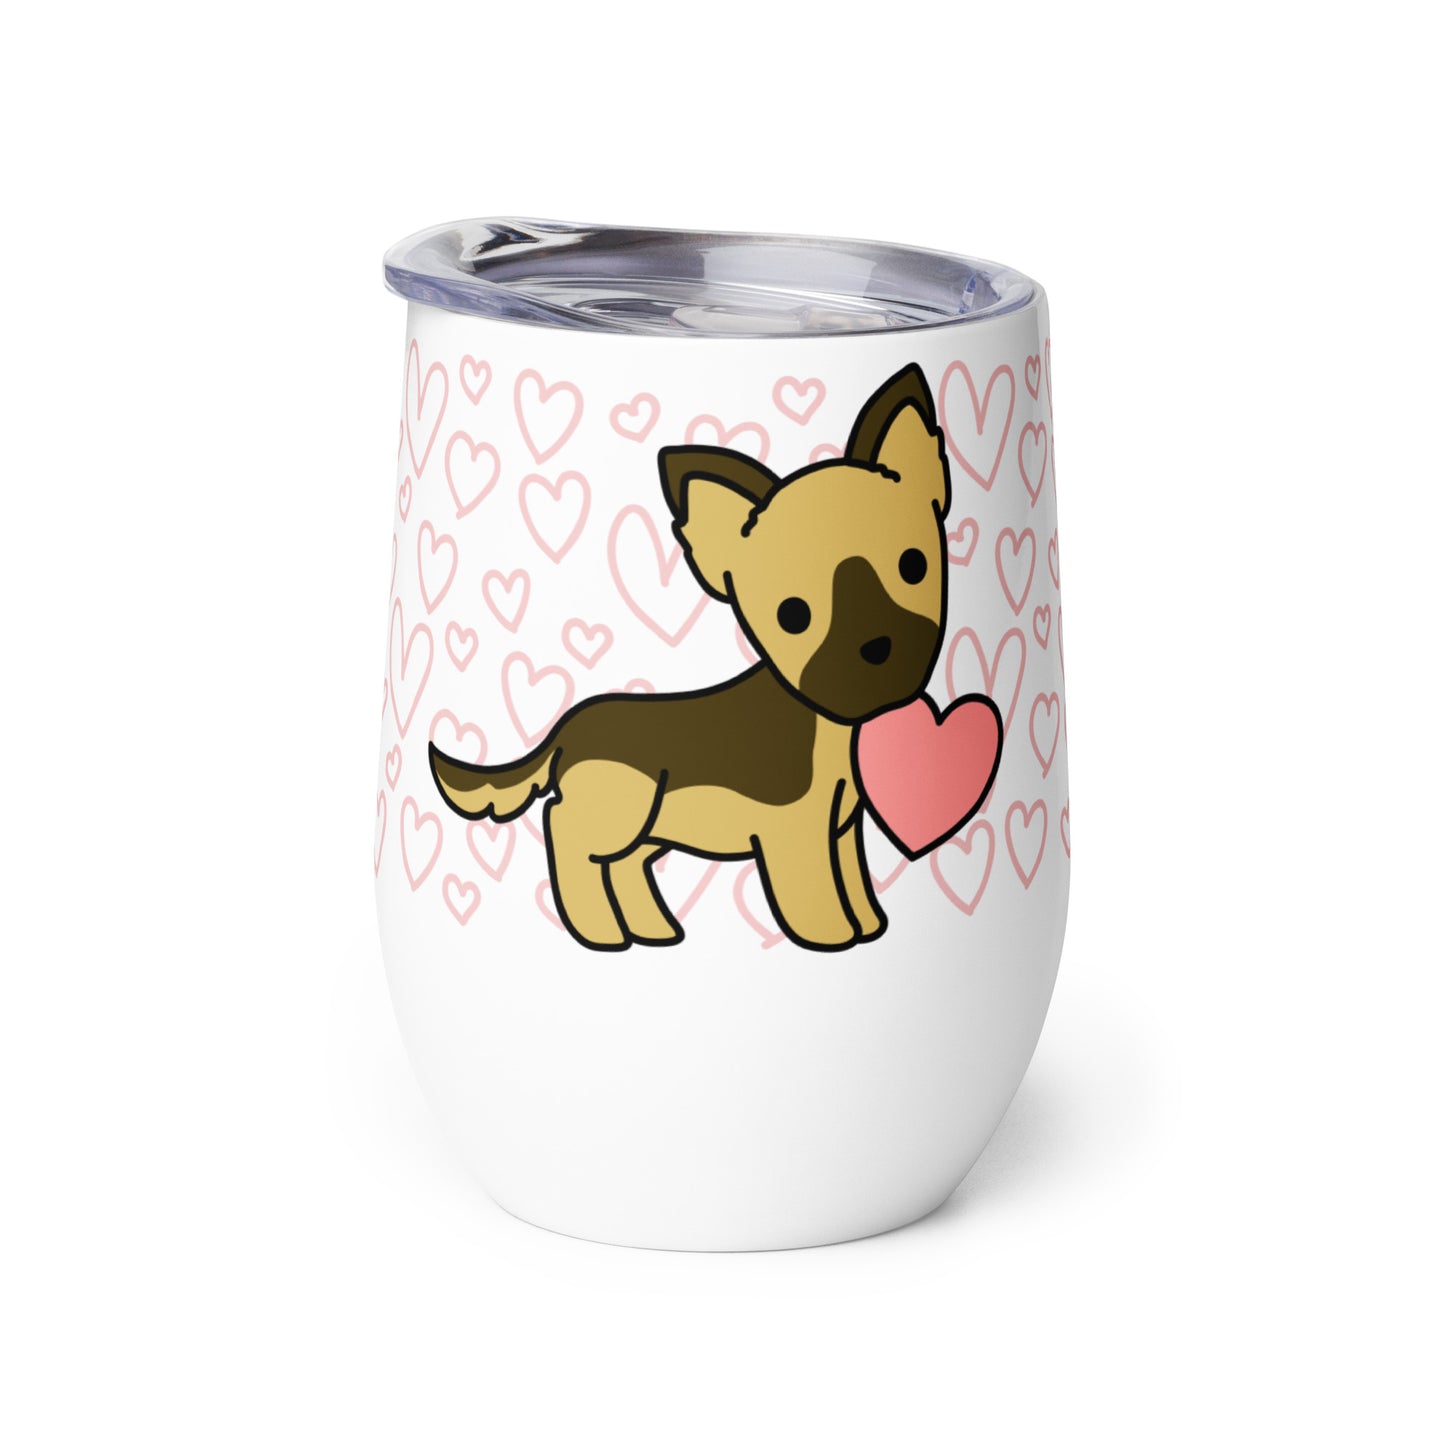 A white metal wine tumbler with a plastic lid. A pattern of hearts wraps around the top half of the tumbler. Centered on the tumbler is a cute, stylized illustration of a German Shepherd